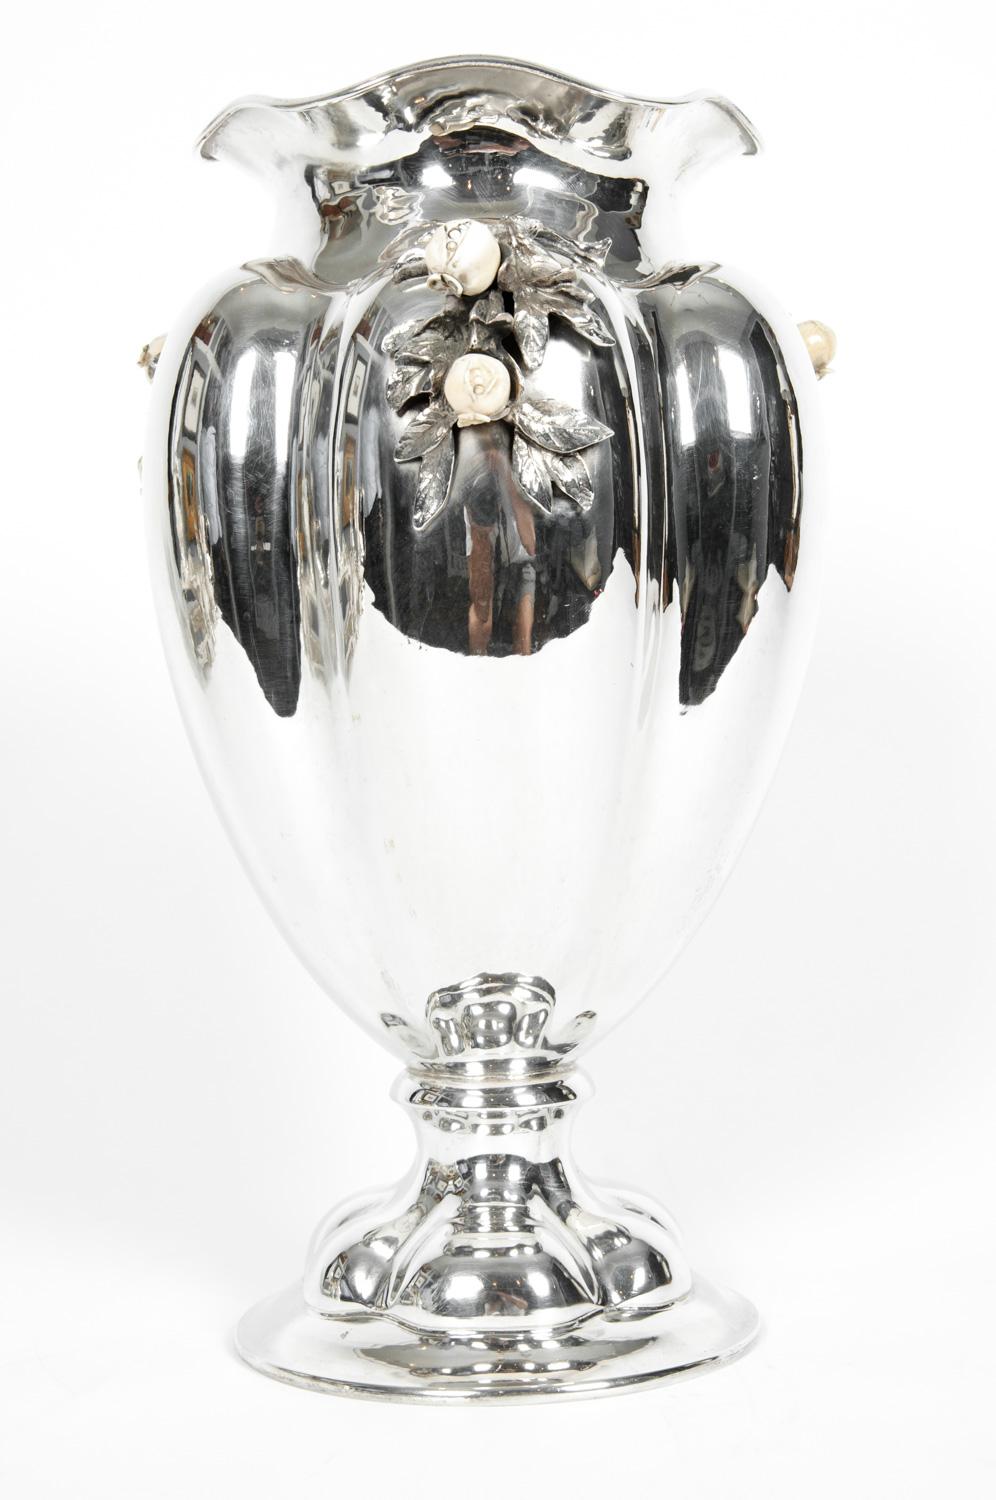 Mid-19th Century Large Antique Sterling Silver Centrepiece / Flower Vase